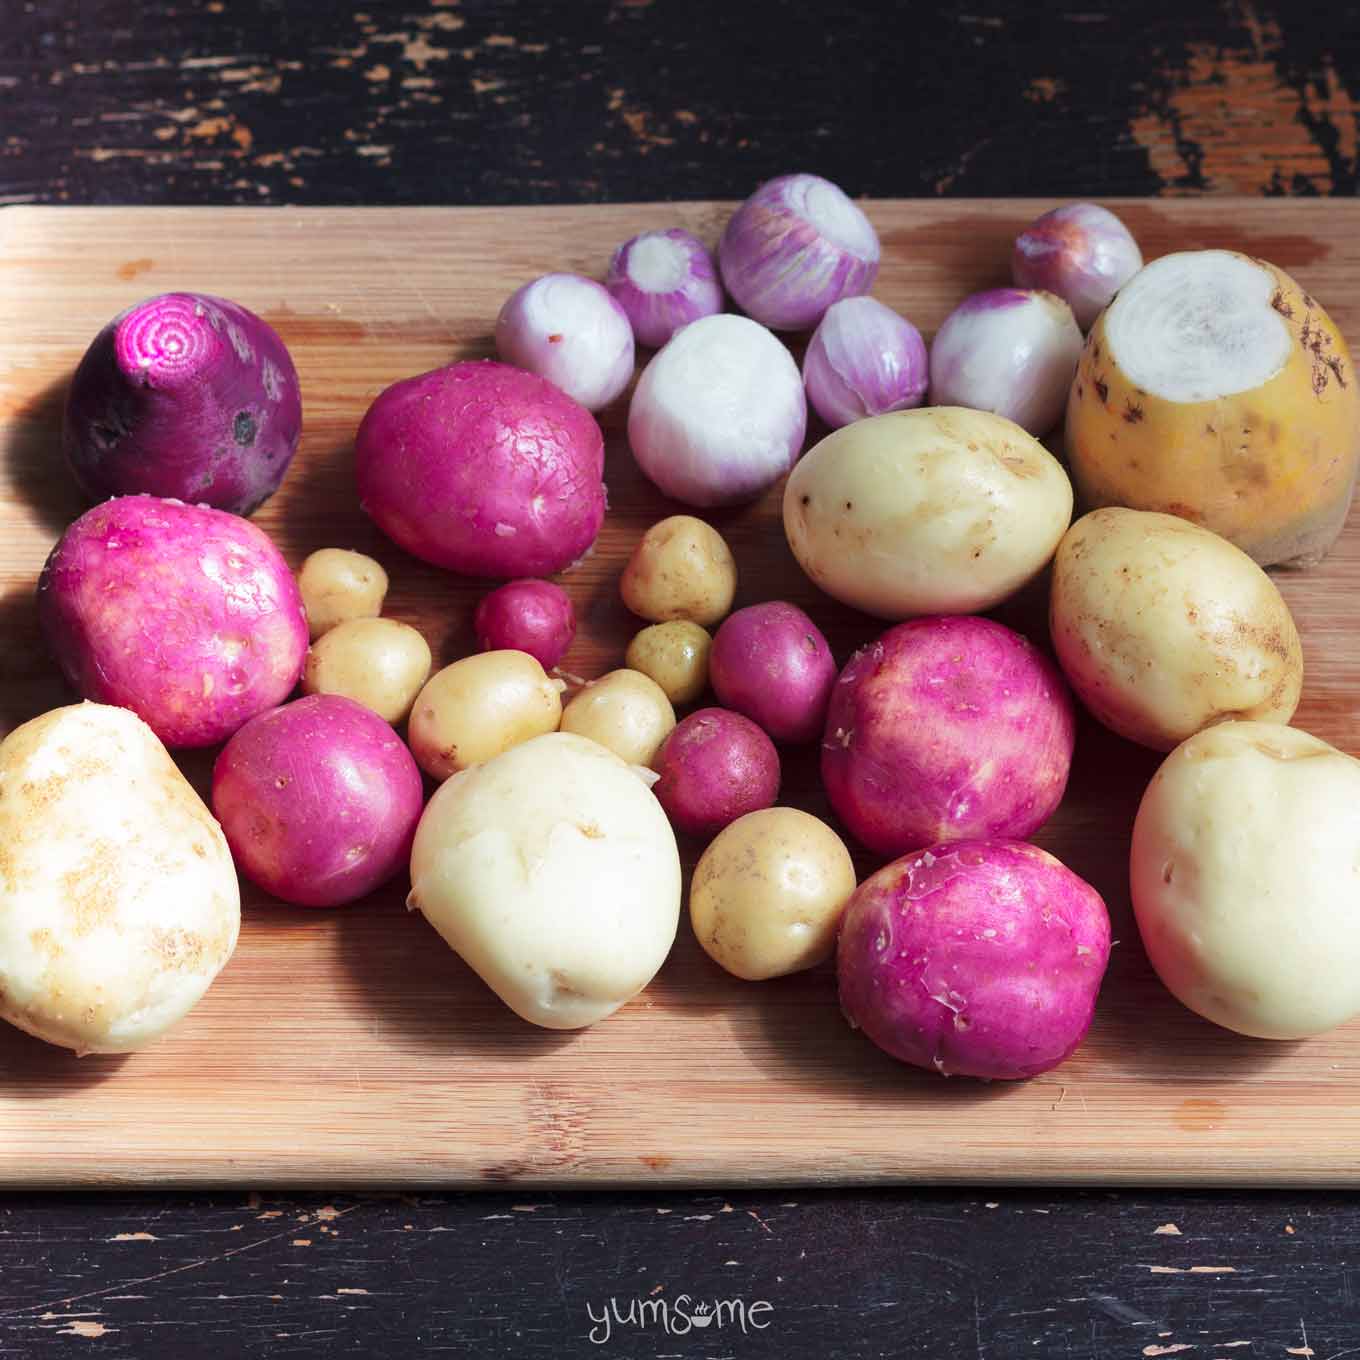 potatoes, beets, and shallots | yumsome.com